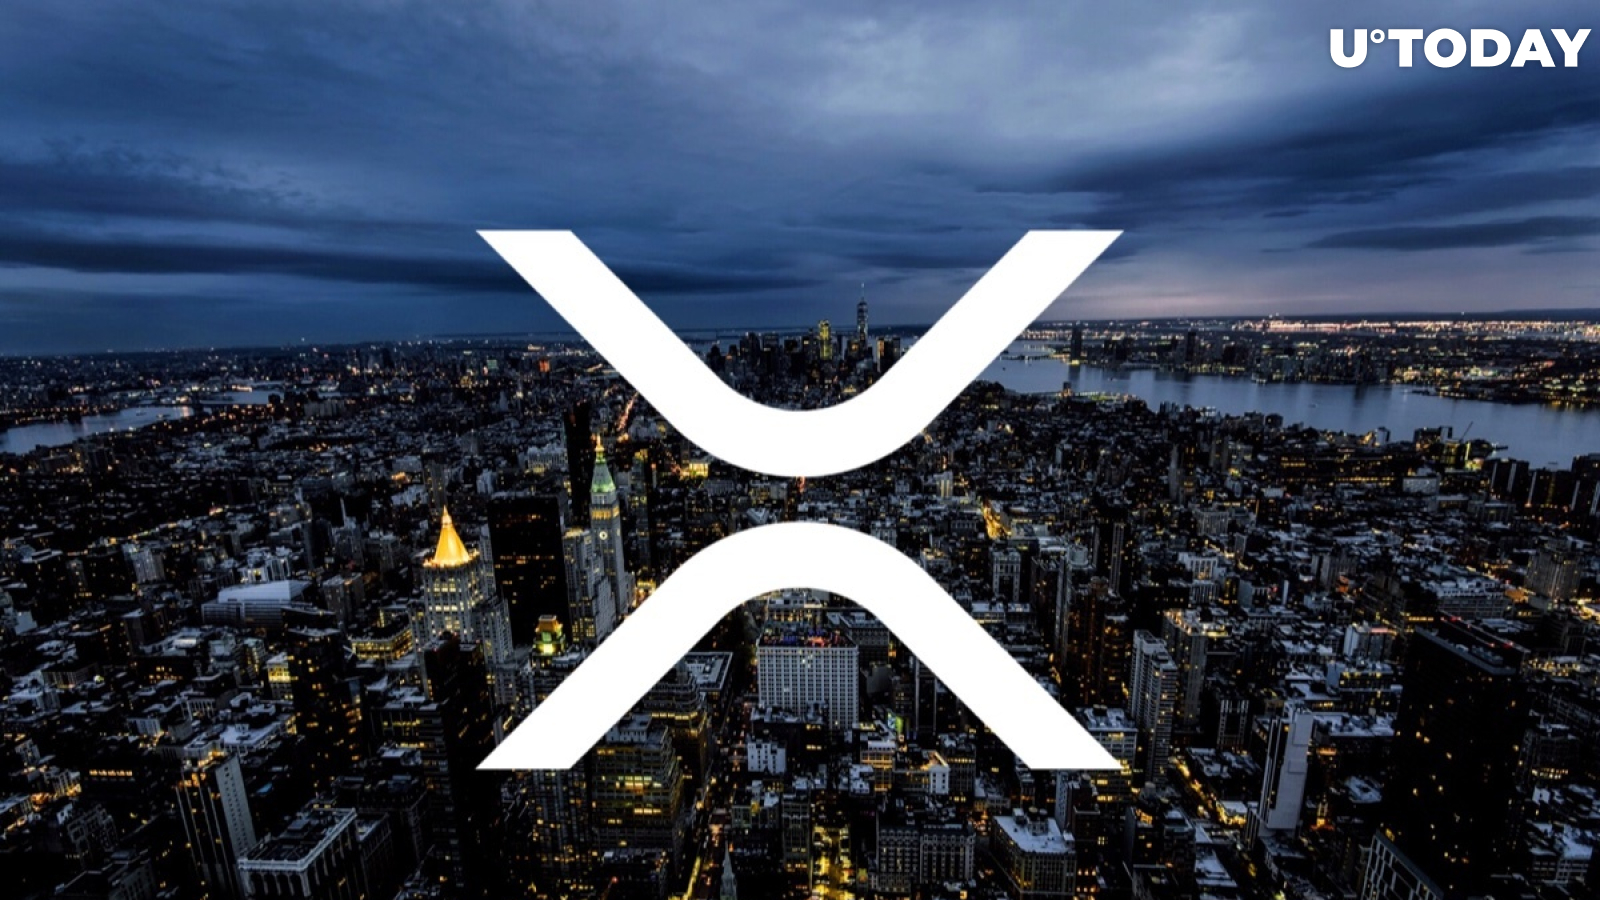 Ripple’s XRP Price Either Hits $590 by End of 2019 or Collapses: Report